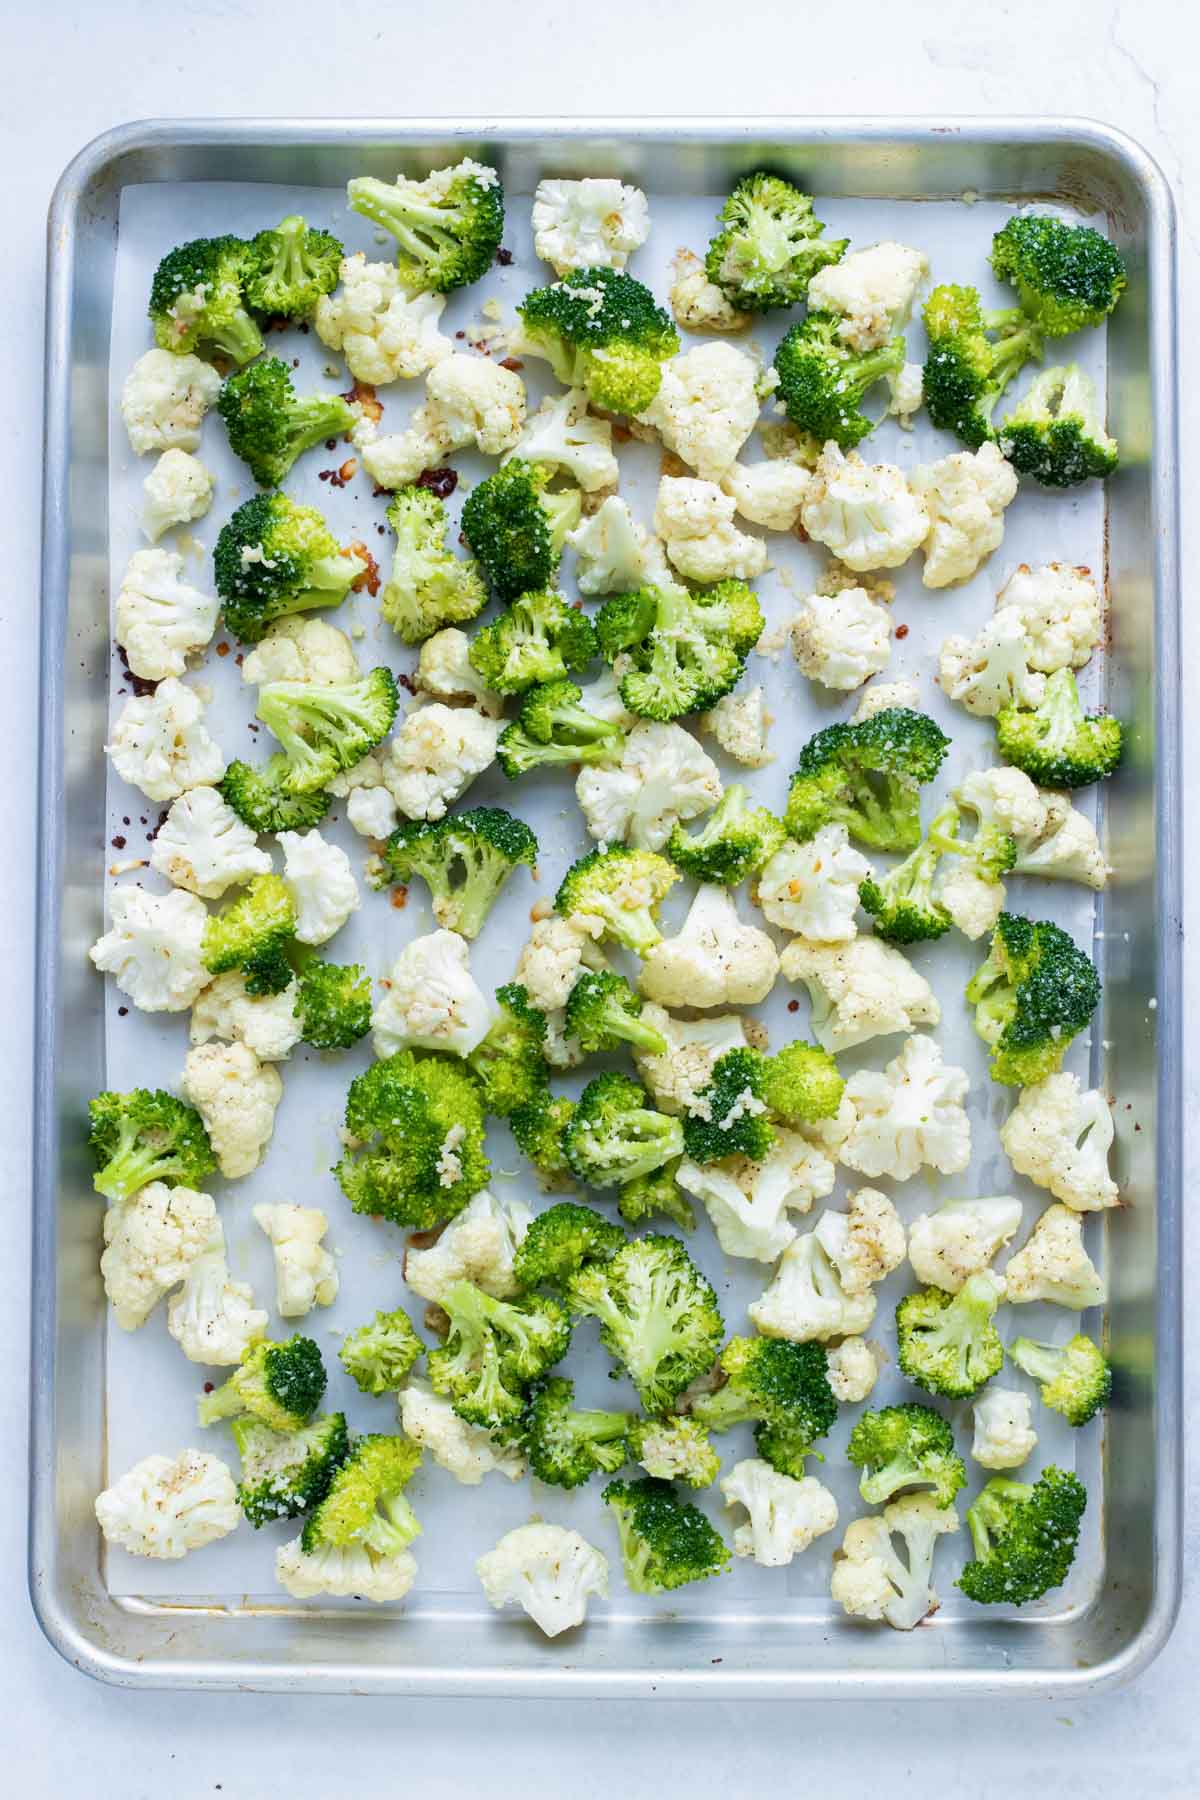 Oven roasted broccoli and cauliflower is a low carb side baked in the oven.